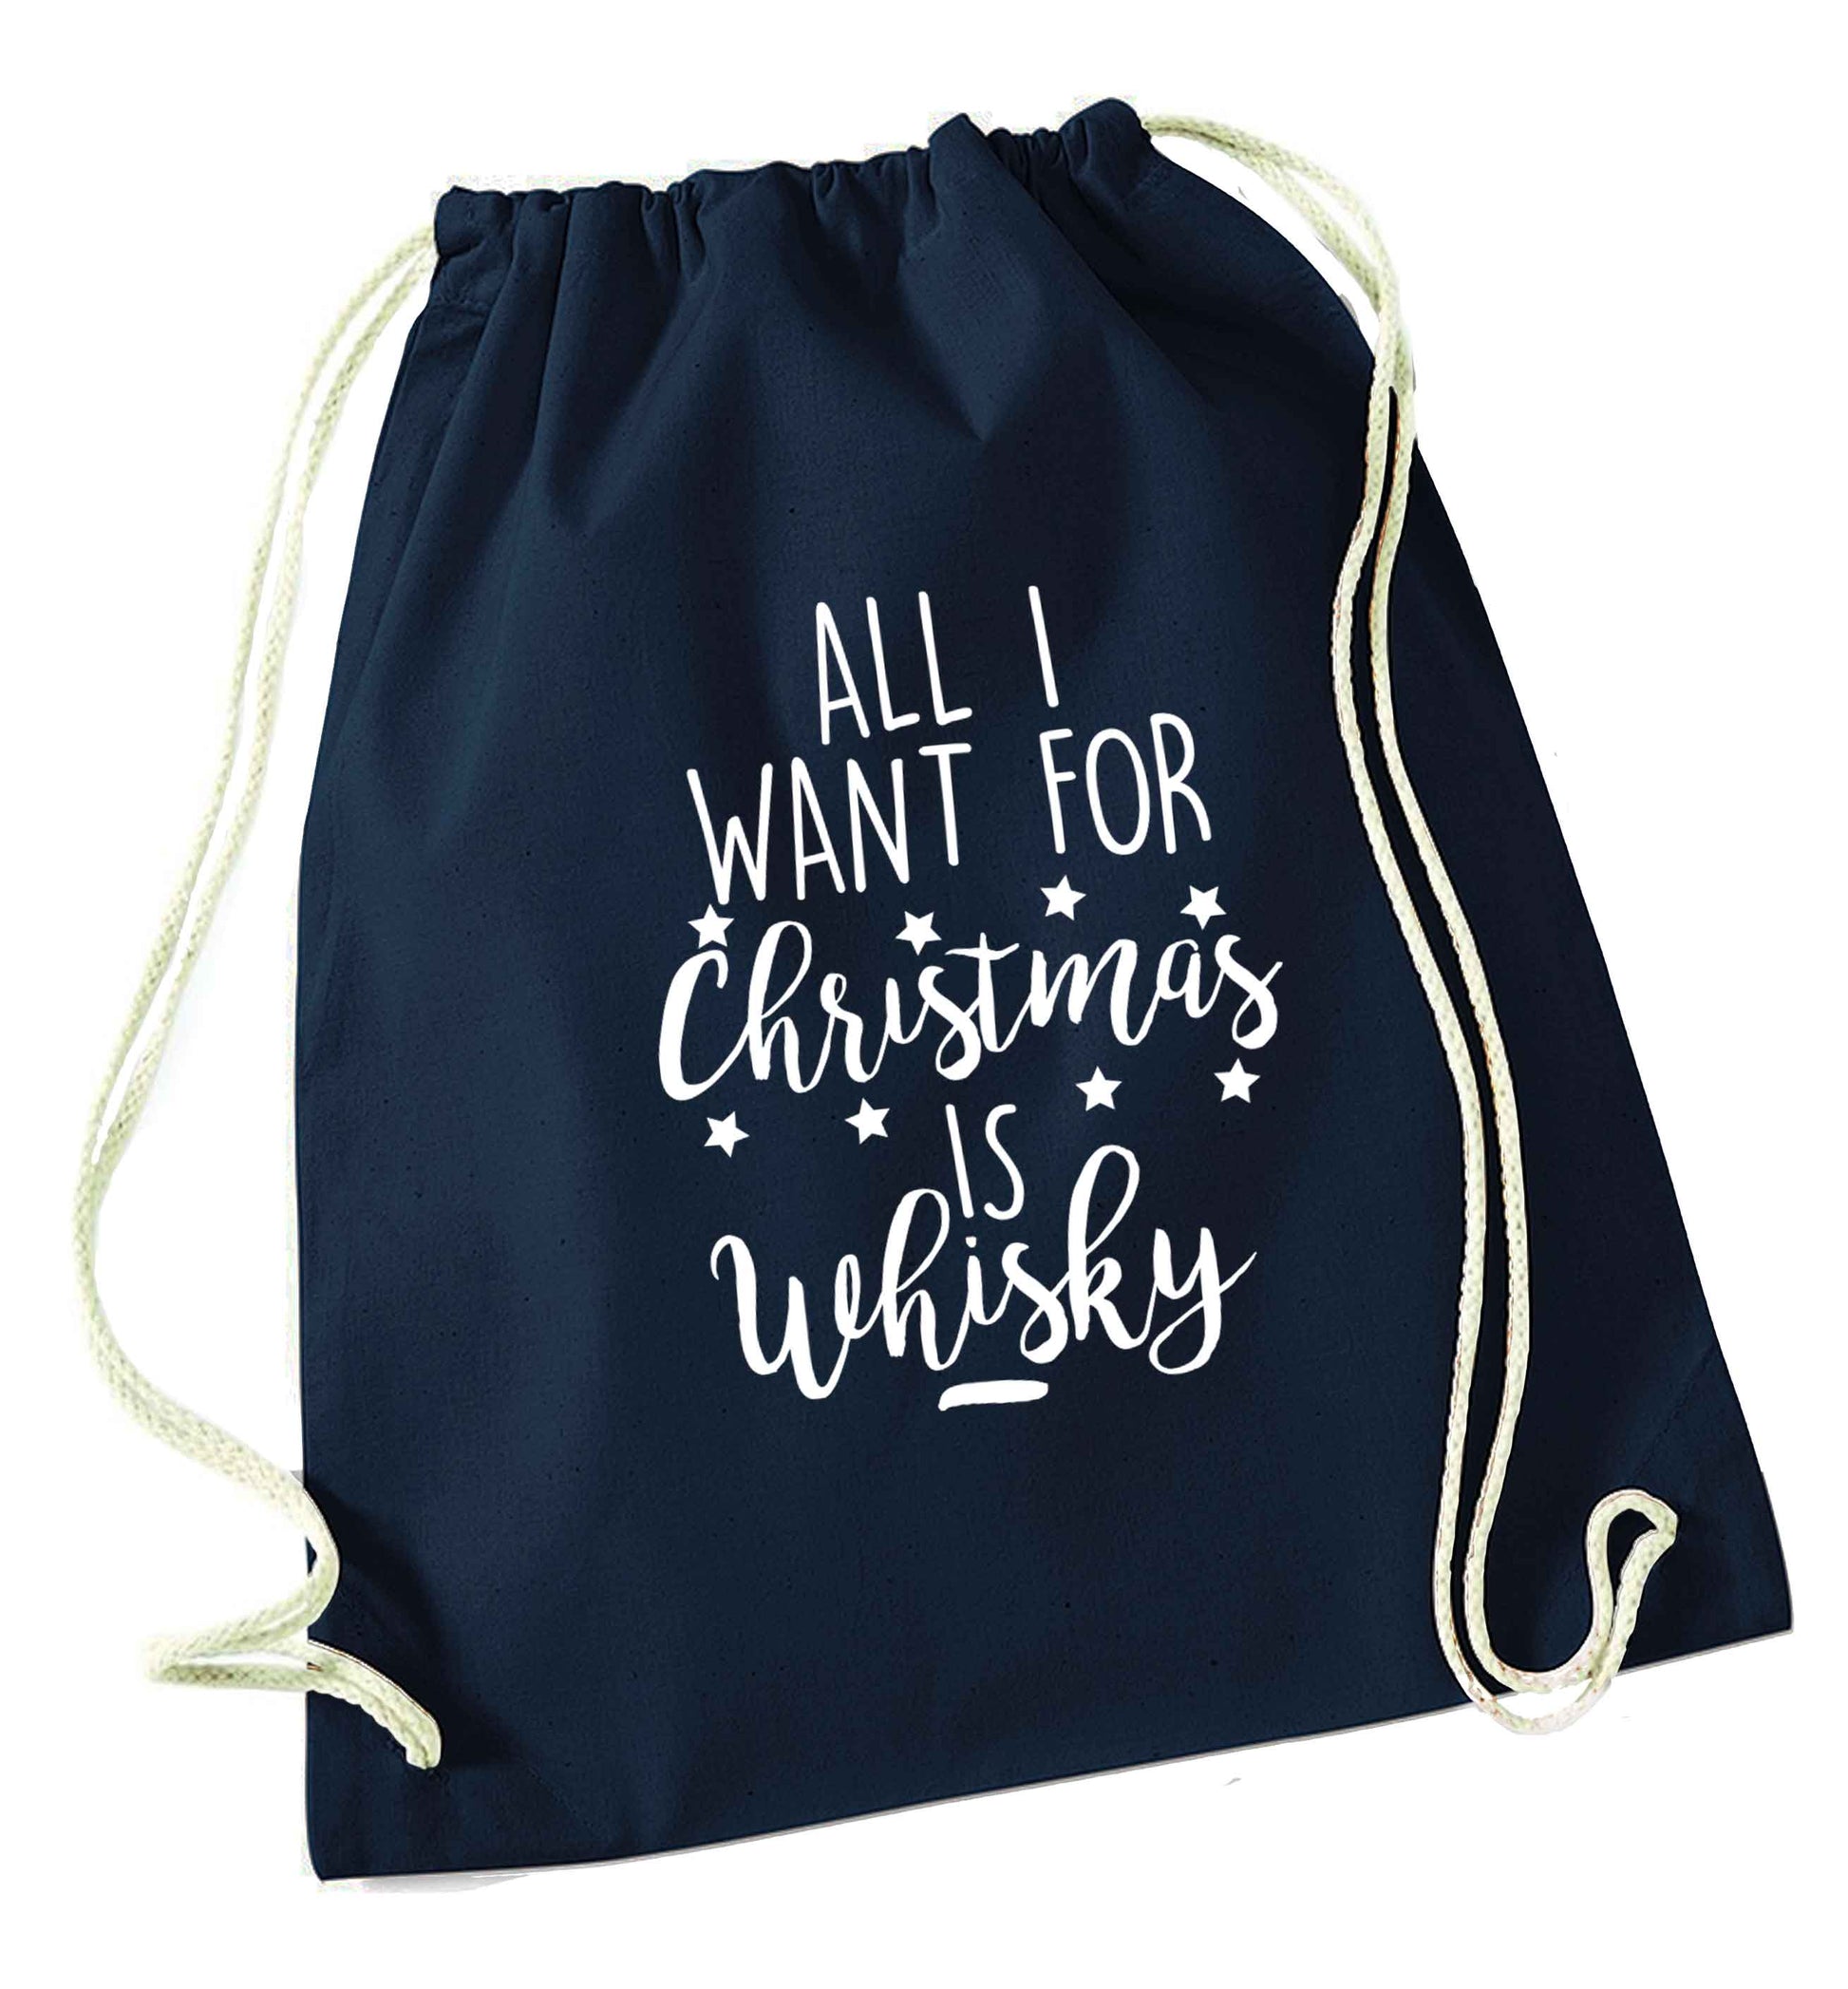 All I want for Christmas is whisky navy drawstring bag